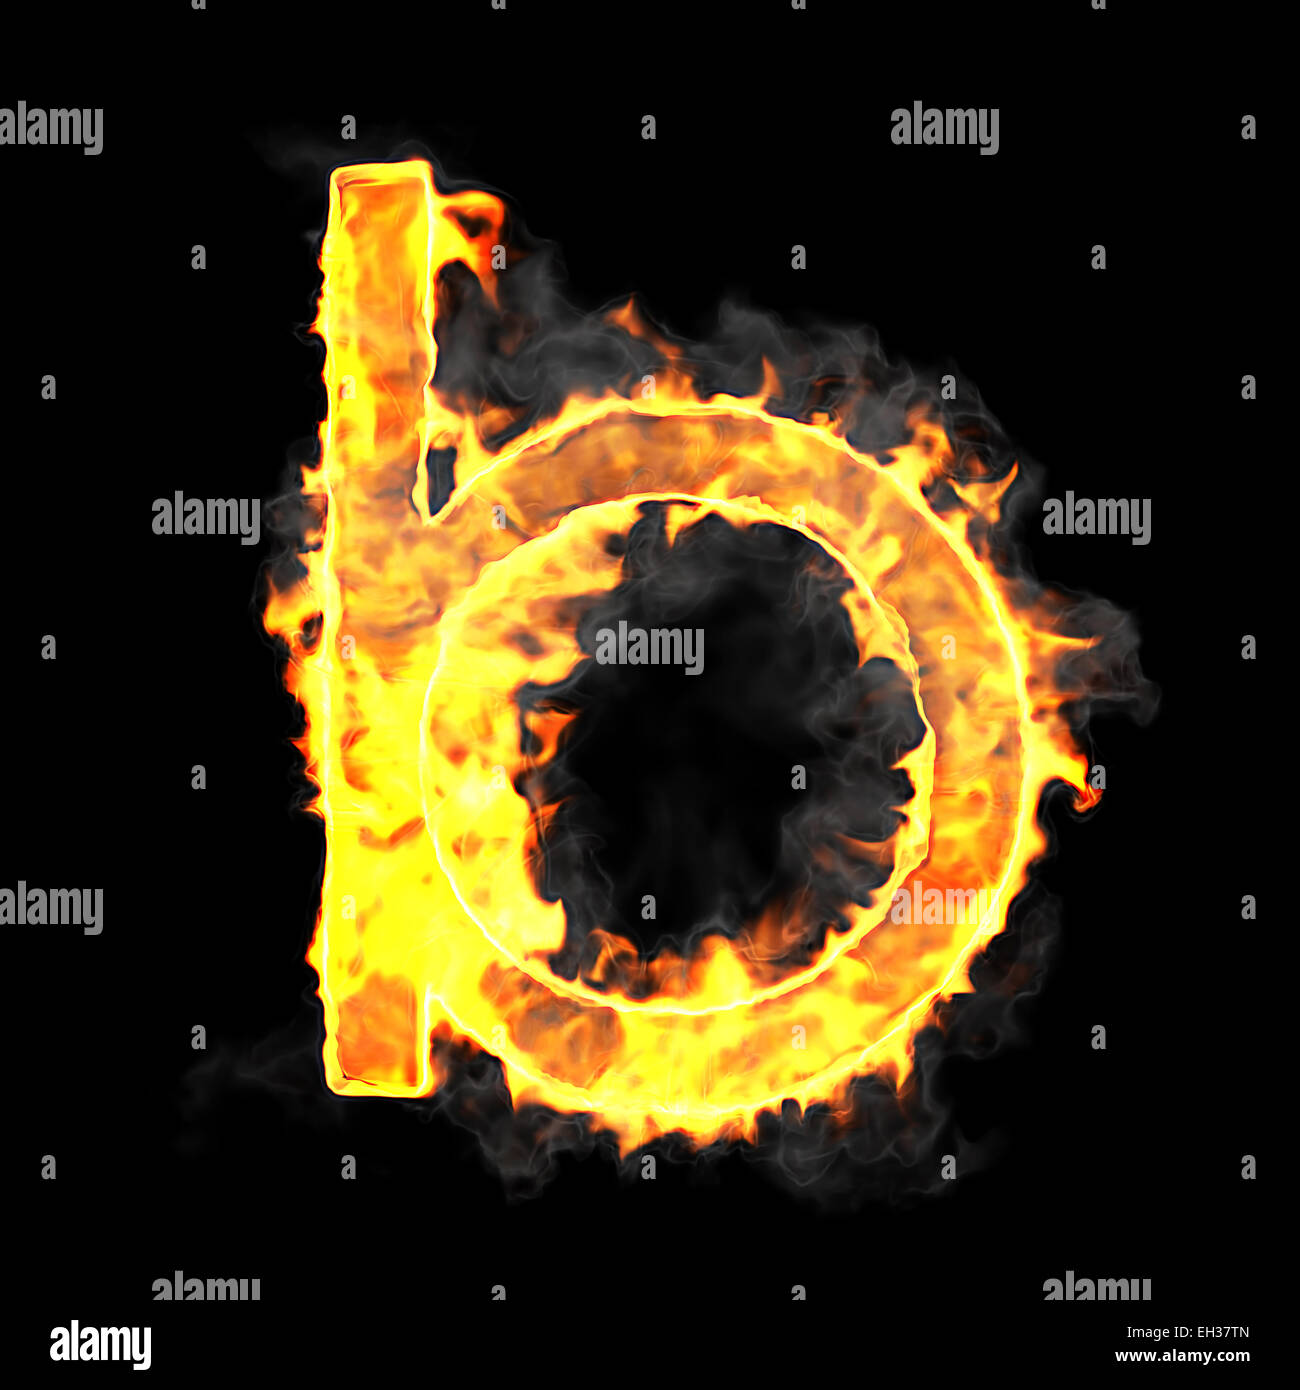 Burning and flame font B letter over black background Stock Photo